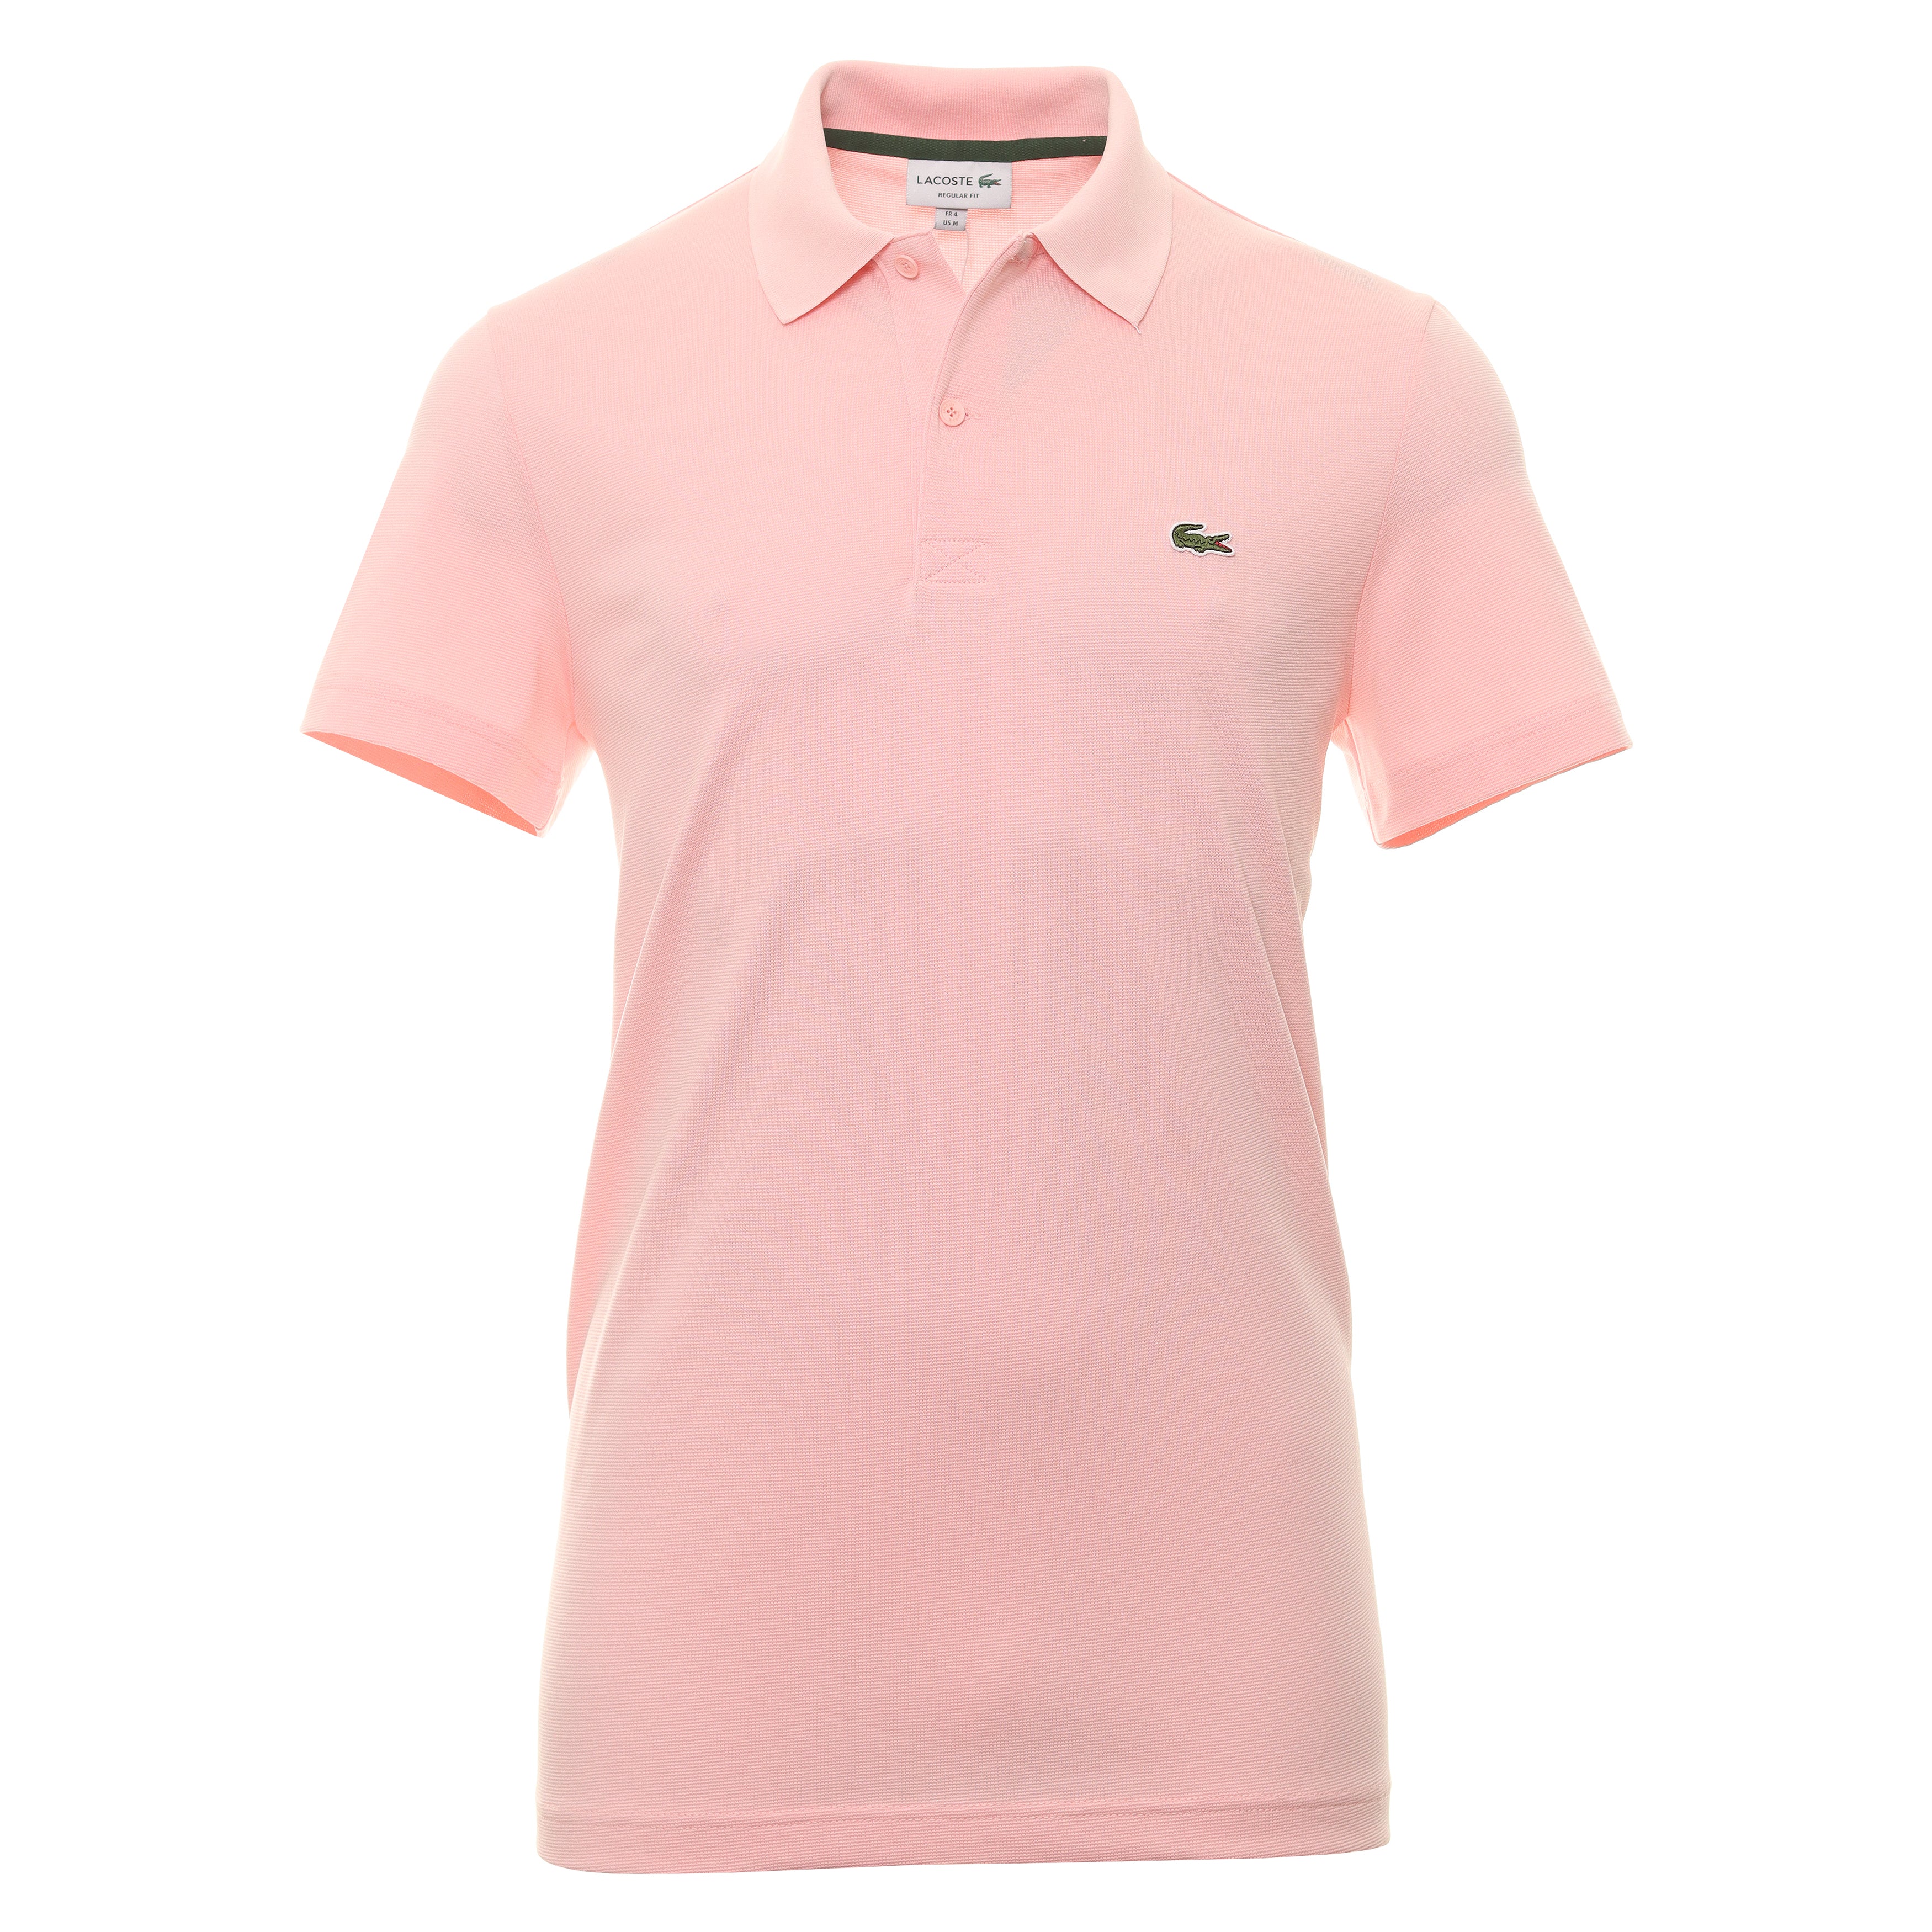 Lacoste Organic Cotton Stretch Polo Shirt DH0783 Pink KF9 | Function18